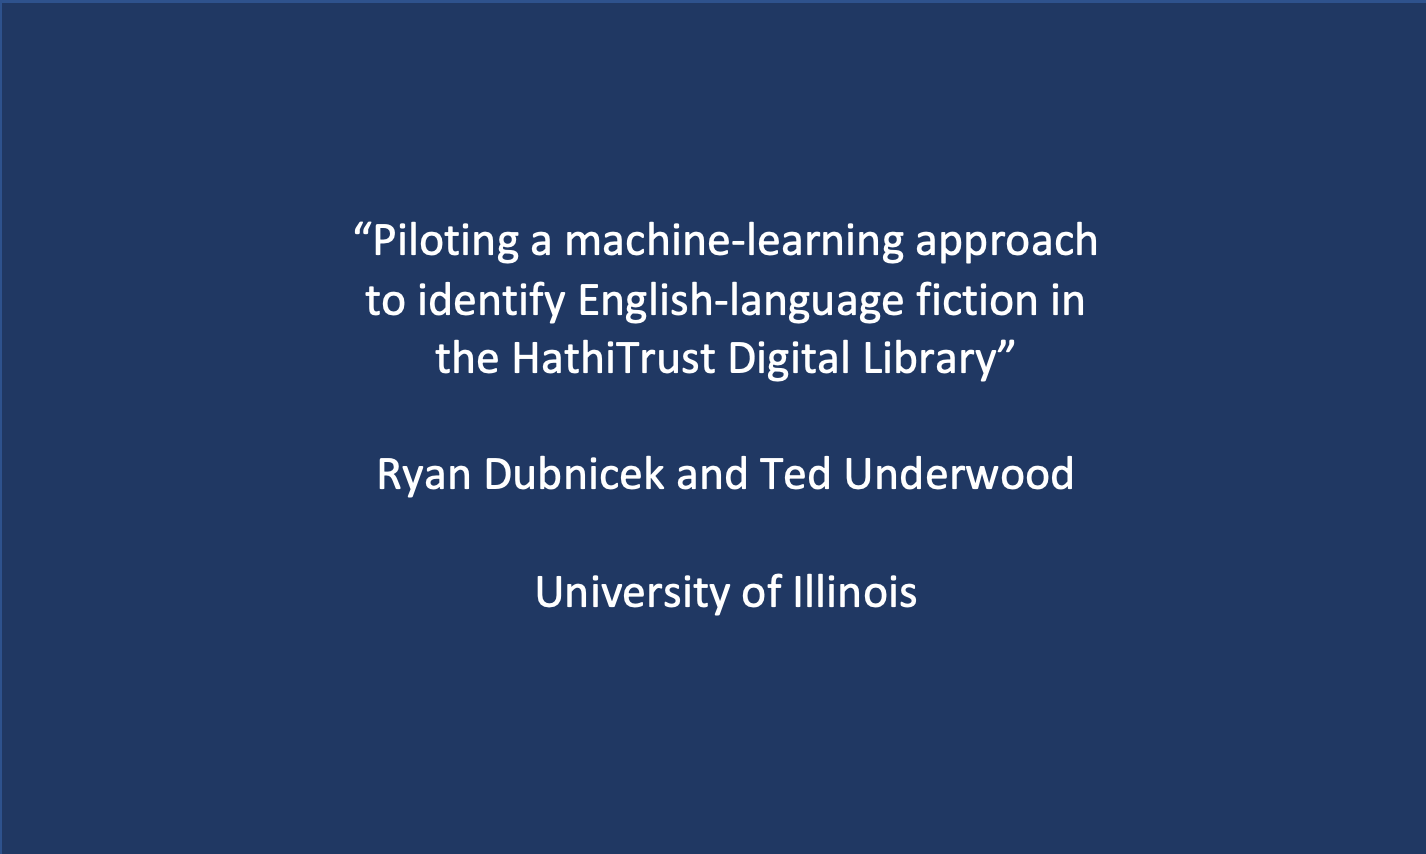 Workshop 5: Ryan Dubnicek and Ted Underwood, ‘Piloting a machine-learning approach to identify English-language fiction in the HathiTrust Digital Library’